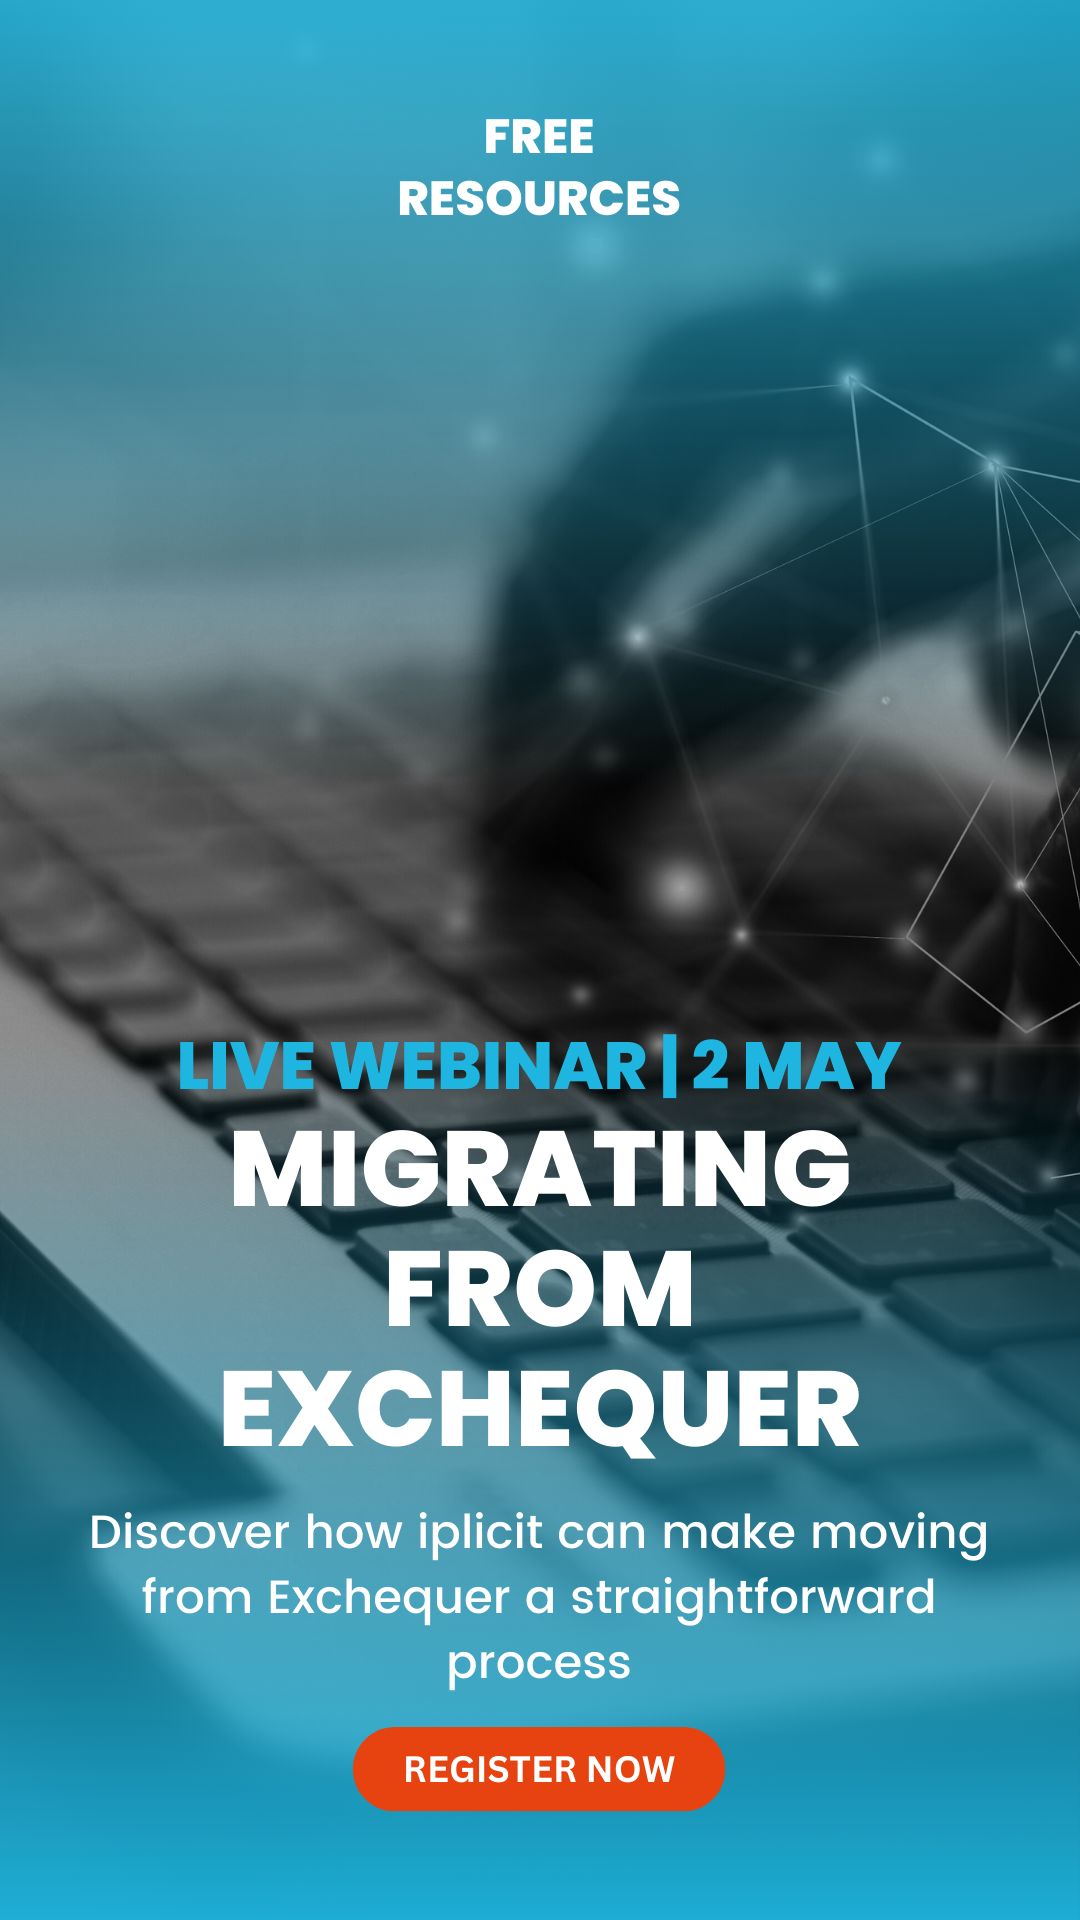 Migrating from Exchequer